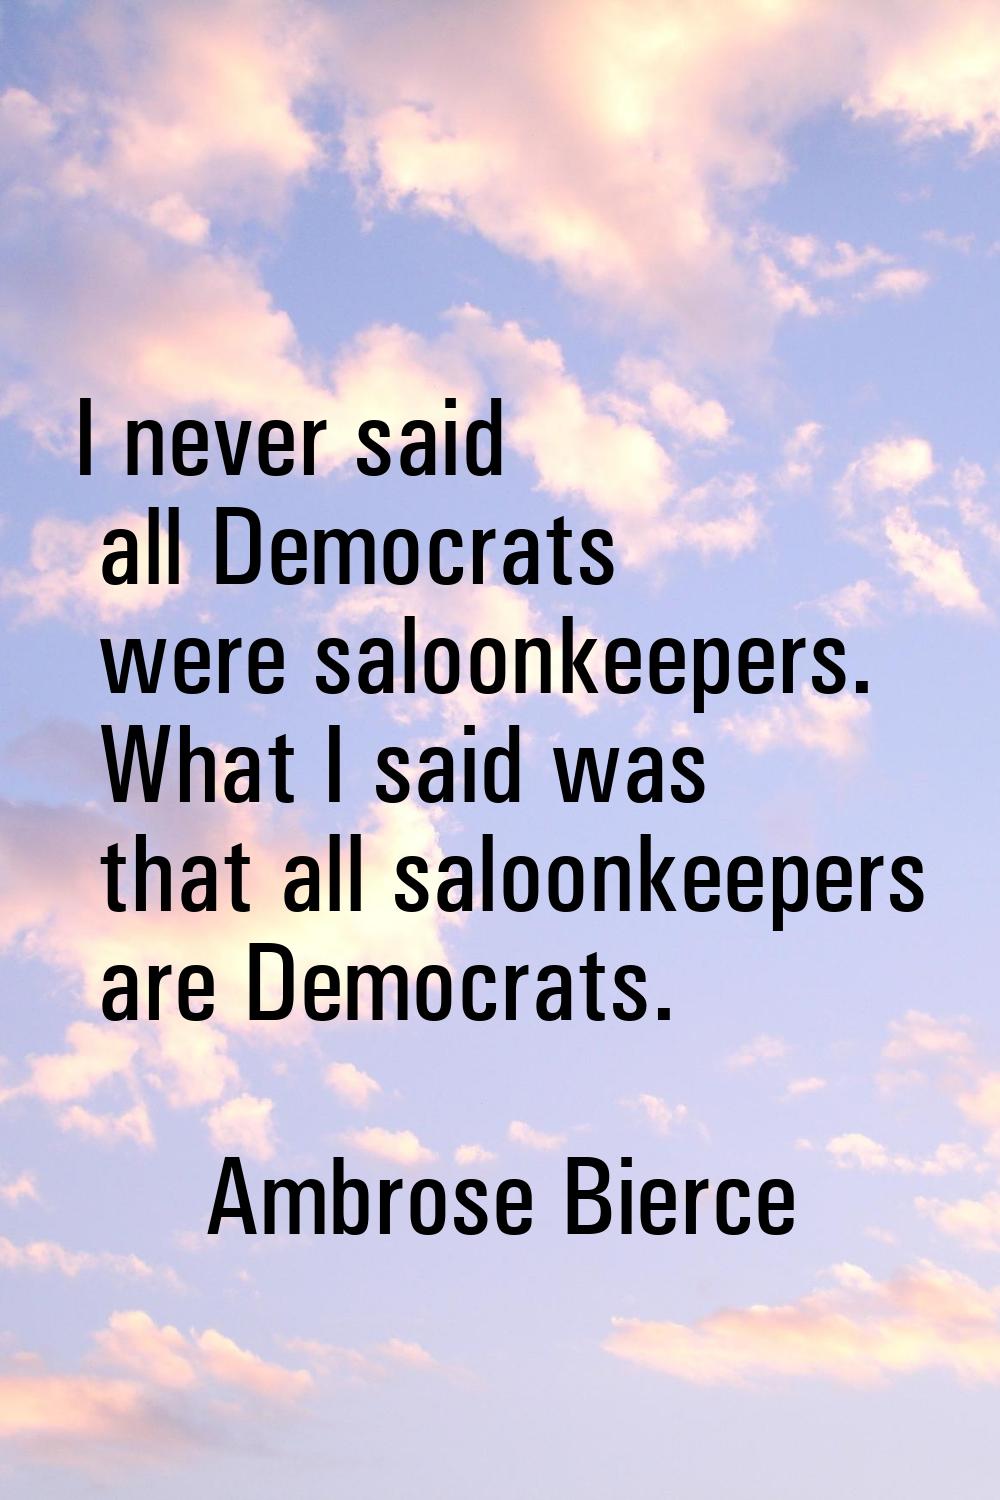 I never said all Democrats were saloonkeepers. What I said was that all saloonkeepers are Democrats